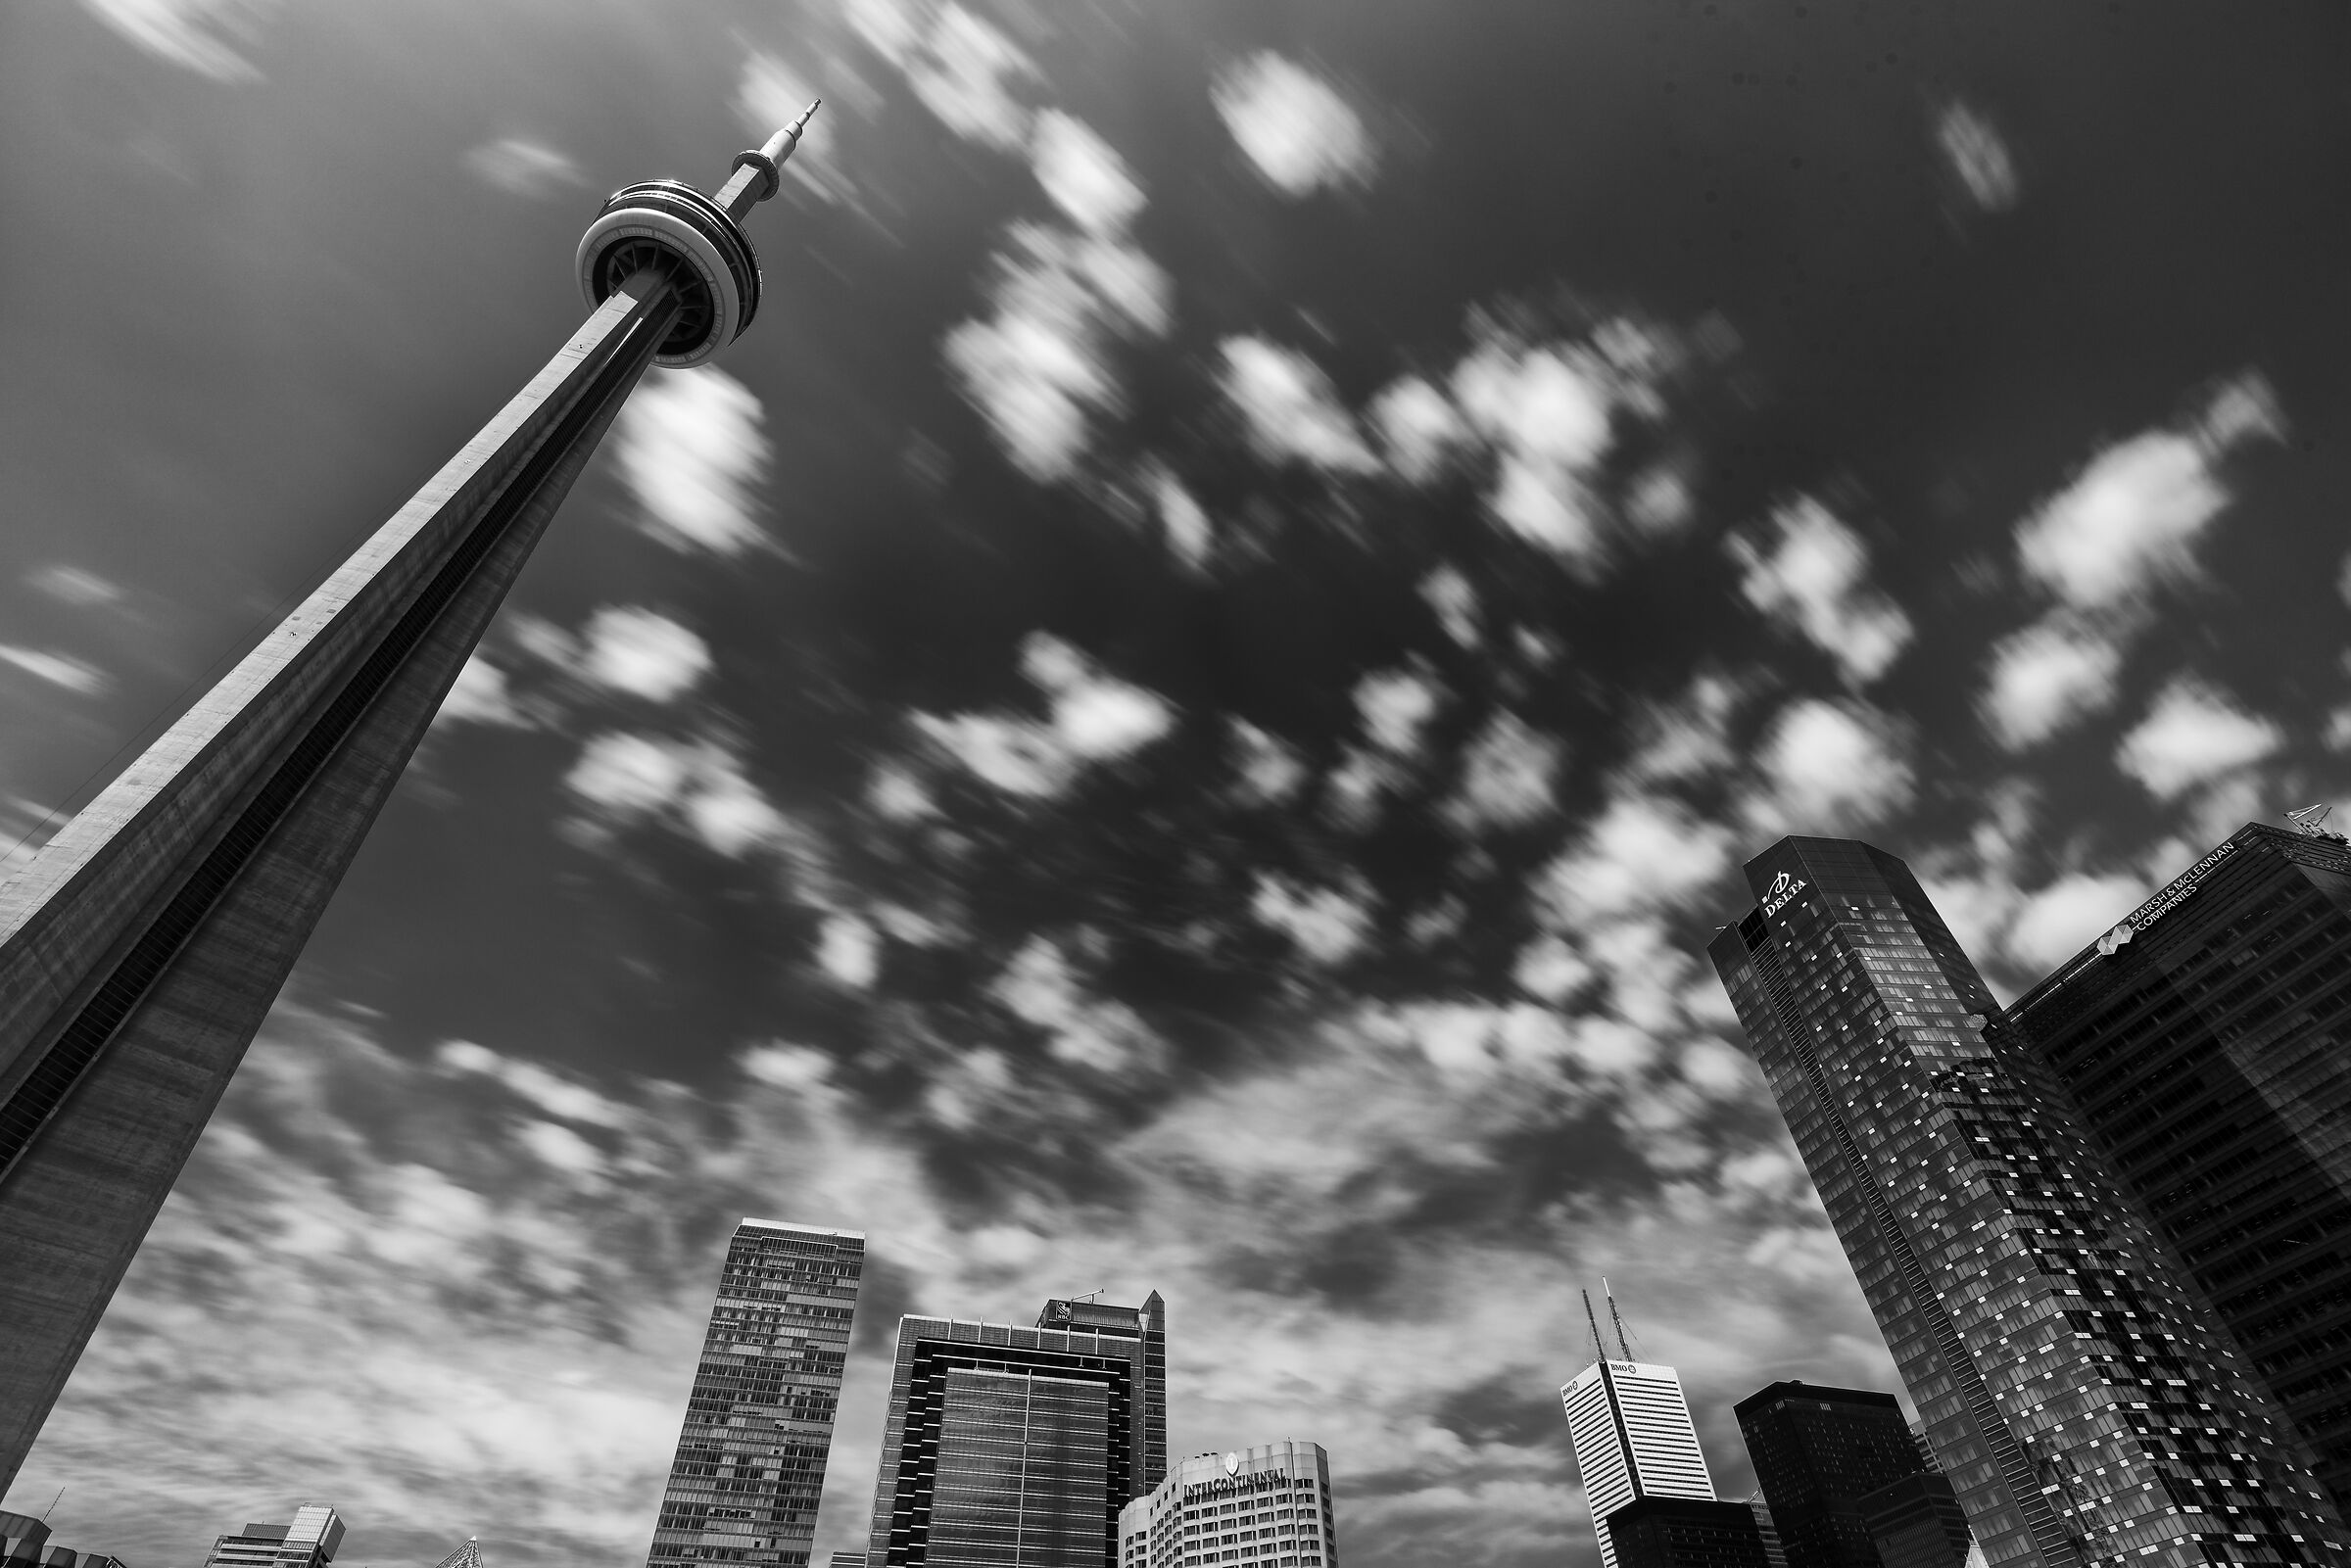 CN tower dreaming...